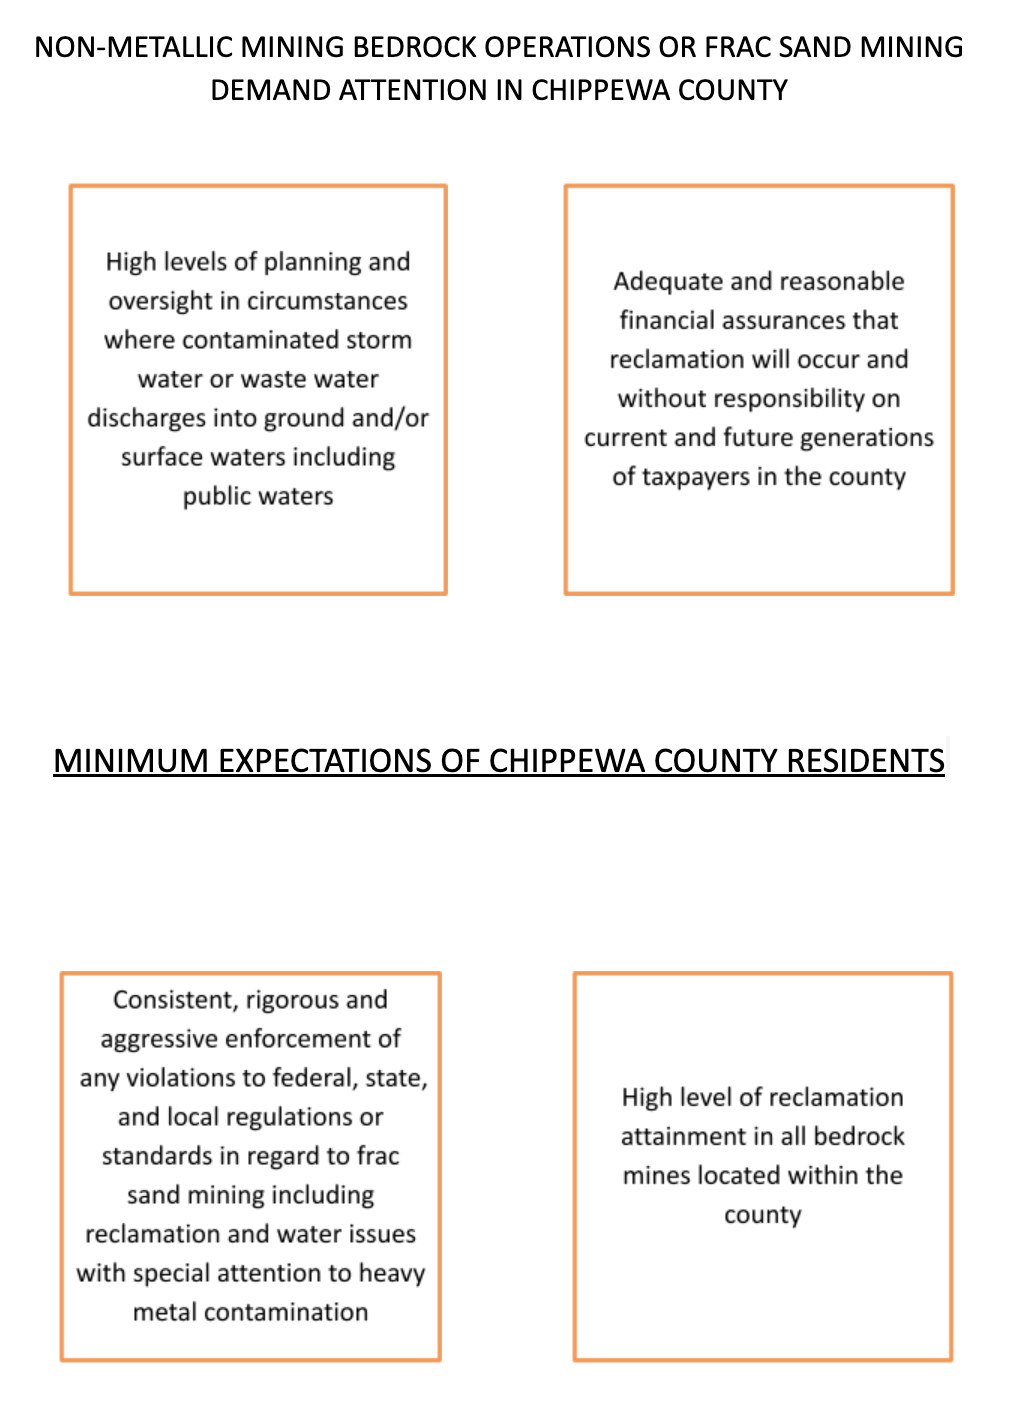 Handout listing four minimum expectations from residents concerned with frac sand mining in Chippewa County Wisconsin. 1) High levels of planning and oversight in circumstances where contaminated storm water or waste water discharges into ground and/or surface waters including public waters. 2) Adequate and reasonable financial assurances that reclamation will occur and without responsibility on current and future generations of taxpayers in the county. 3) Consistent, rigorous and aggressive enforcement of  any violations to federal, state, and local regulations or standards in regard to frac sand mining including reclamation and water issues with special attention to heavy metal contamination. 4) High level of reclamation attainment in all bedrock mines located within the county.